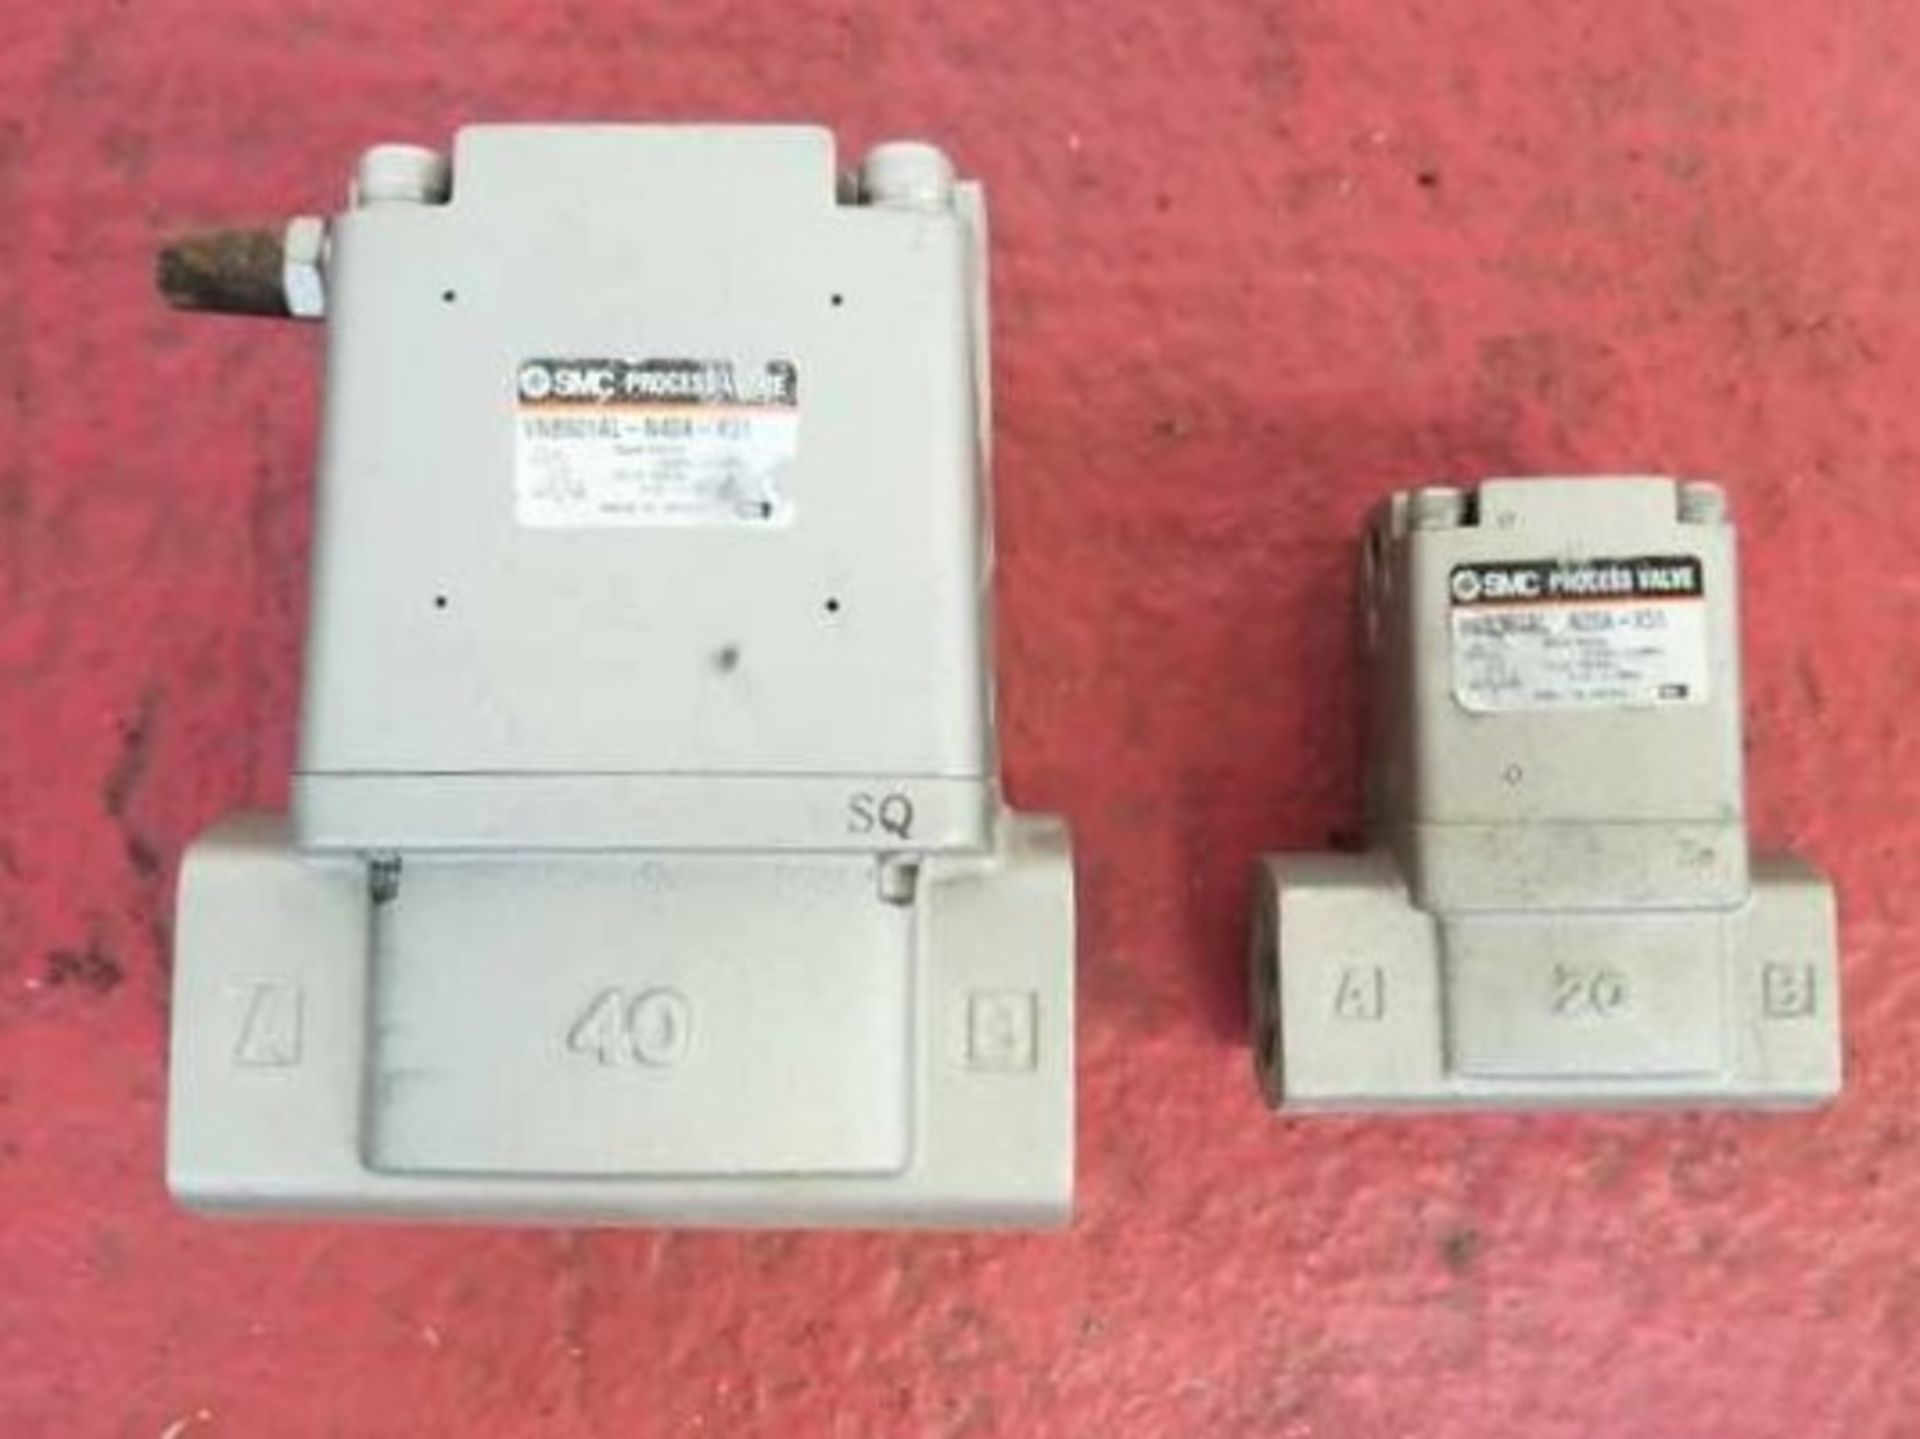 Lot of 2) SMC Process Valves. Two new SMC Process valves. Aluminum body. One is Mdl 20. One Mdl